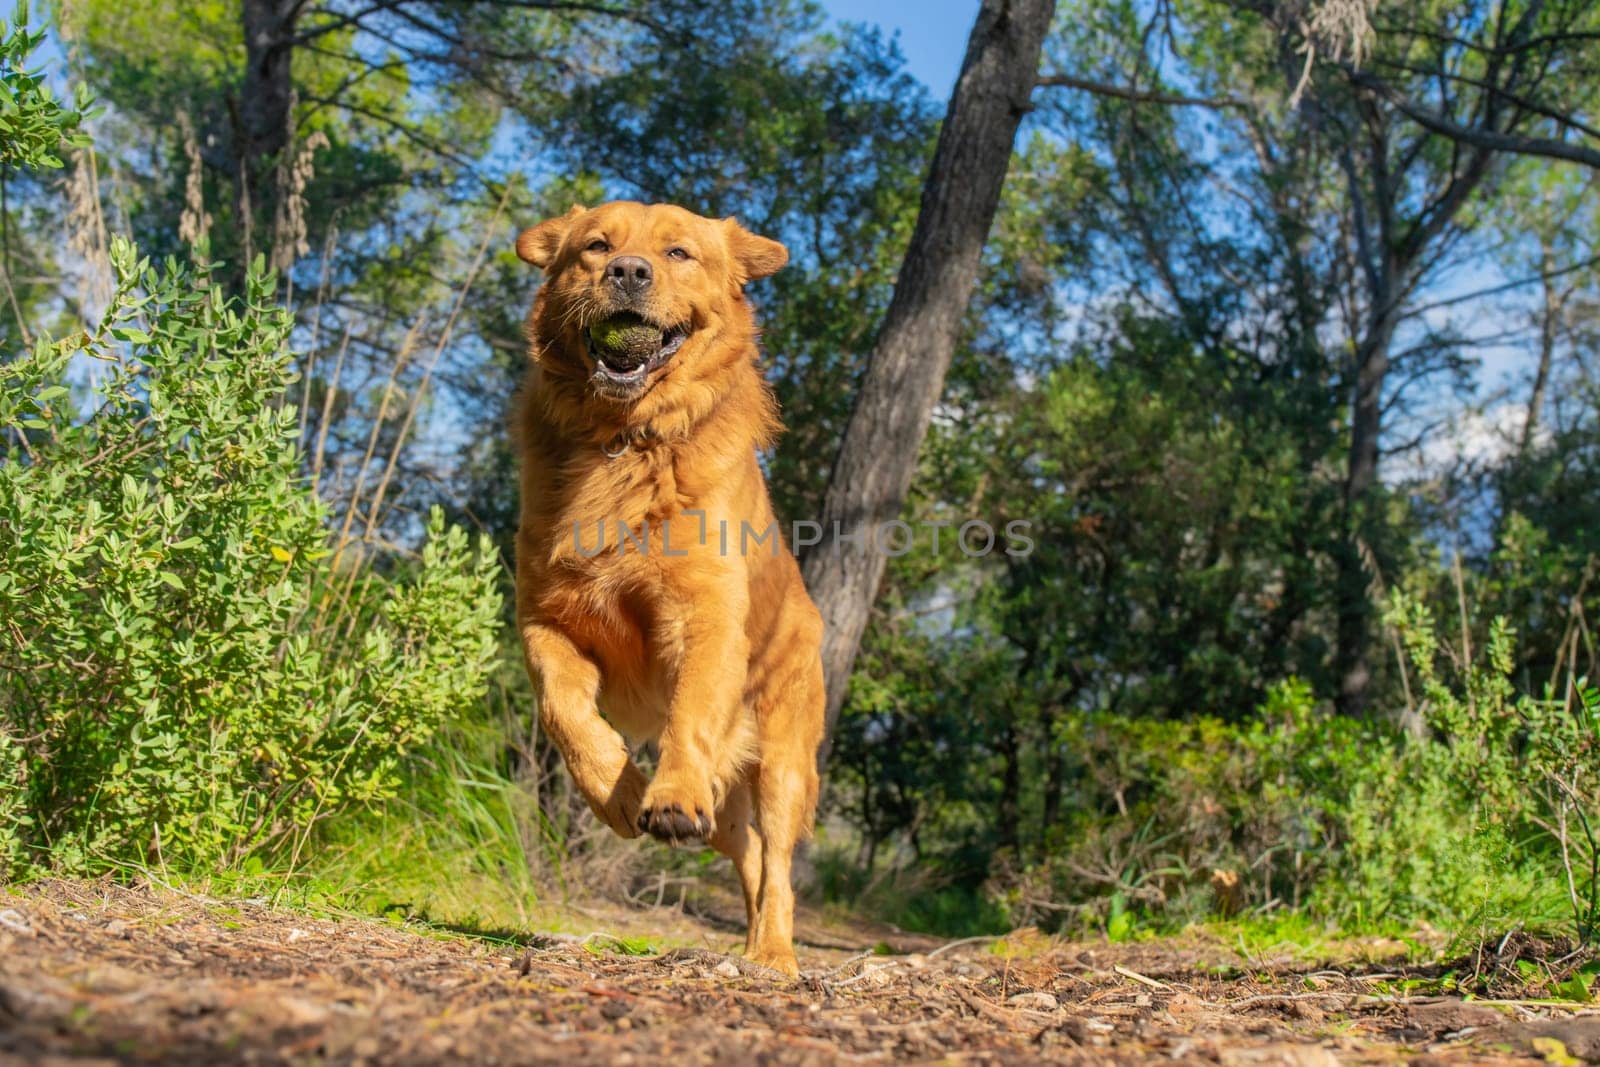 An exuberant golden dog bounds toward the viewer, a tennis ball clutched in its mouth against a backdrop of vibrant forest under sunny skies. Its expression is one of pure delight, embodying the carefree spirit of a playful afternoon